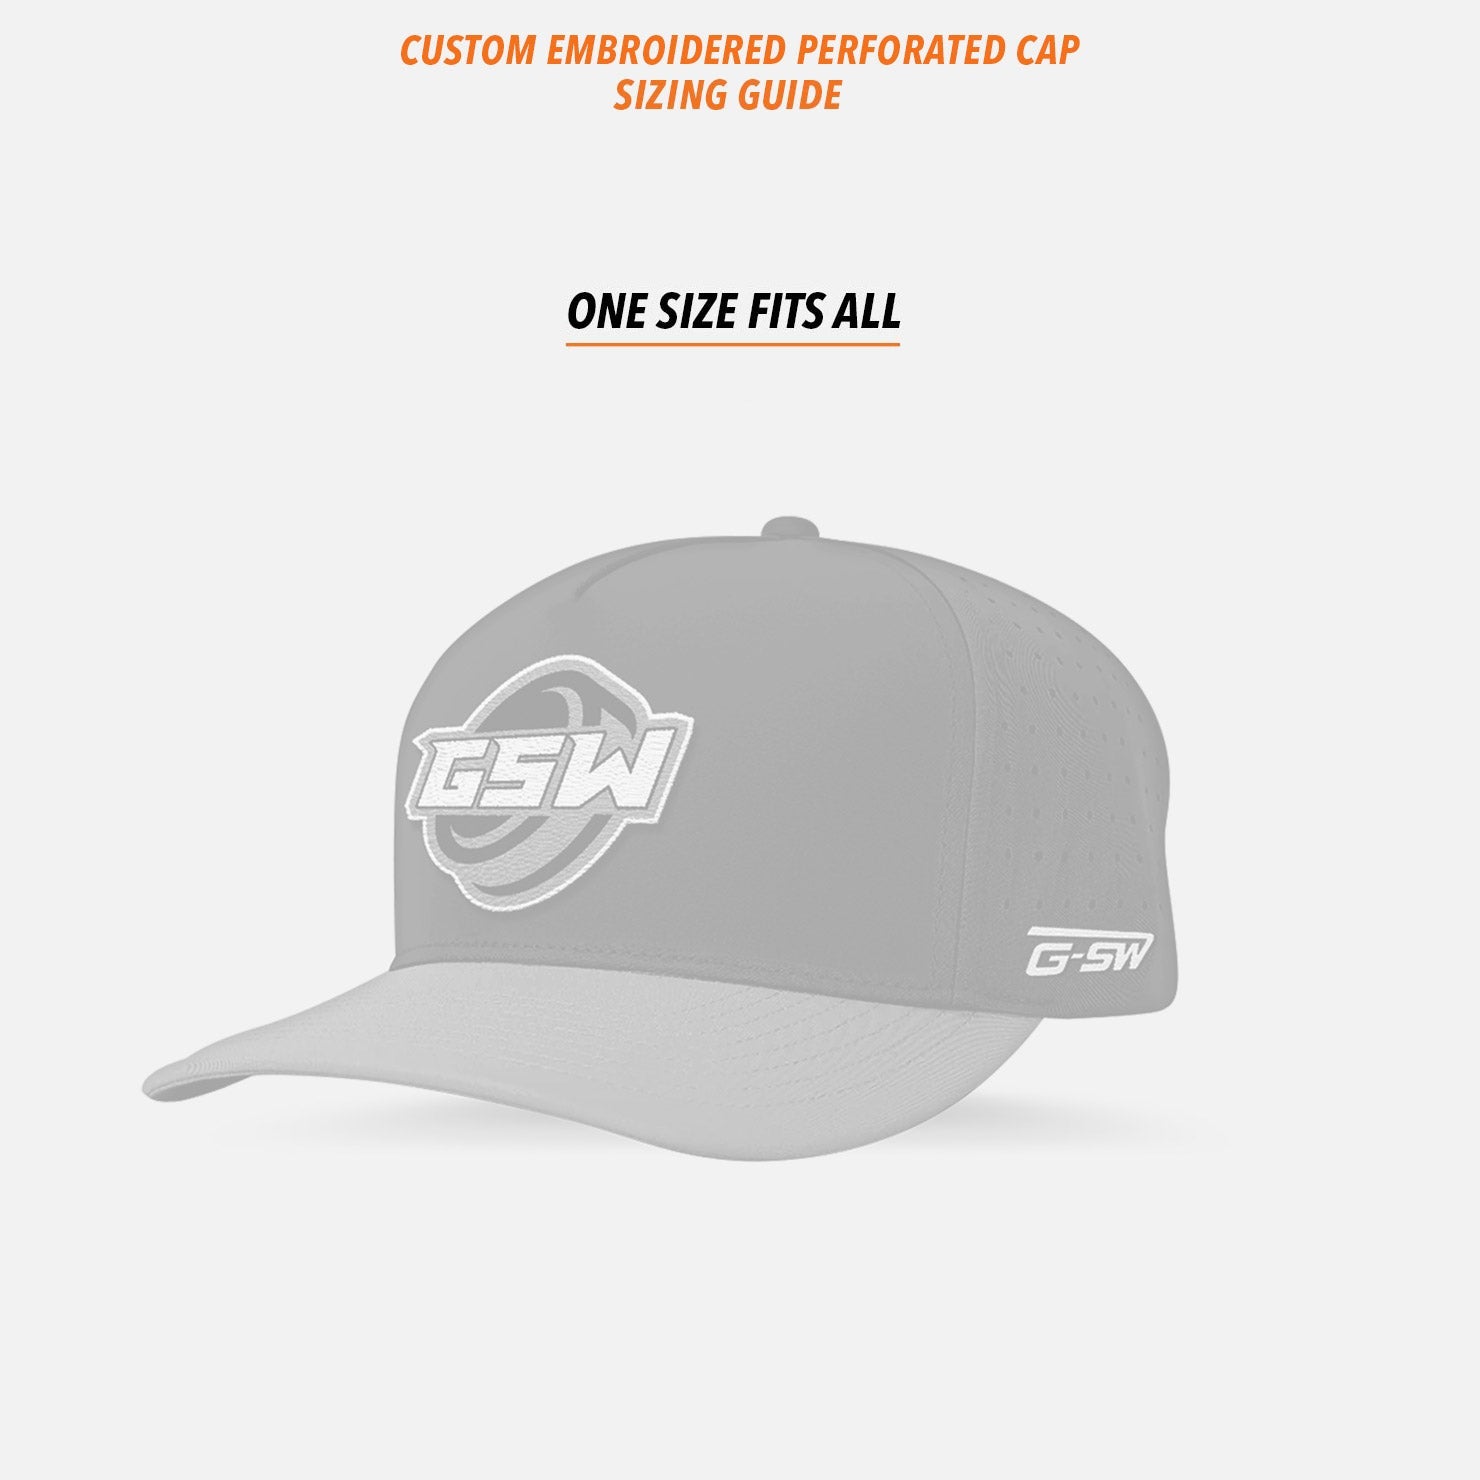 Blind Zebras Embroidered Custom Perforated Cap: GSW Hat Collection 